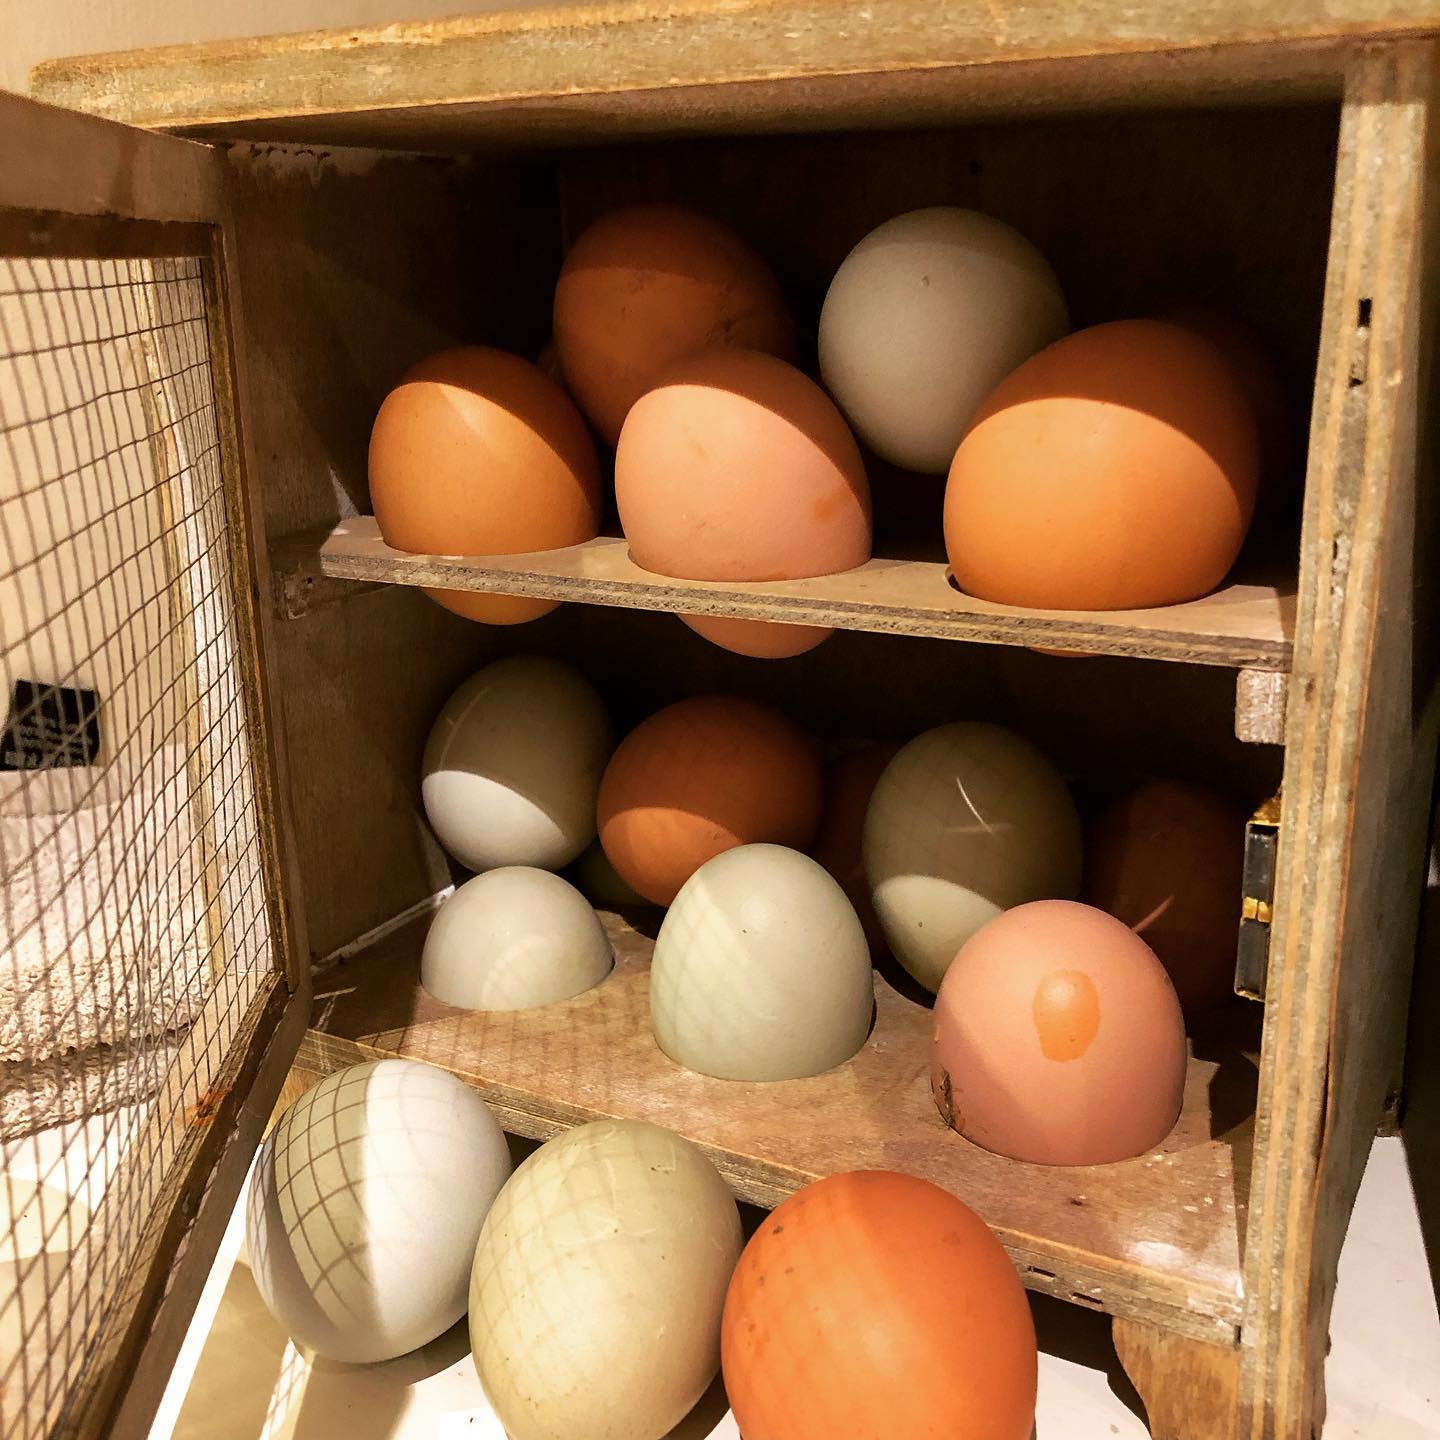 We haven’t been awash with eggs for ages but now the new hens are laying well so we have lots of yummy, deep yellow yolked organic eggs. #thelintmill #organic #happyhens #layers